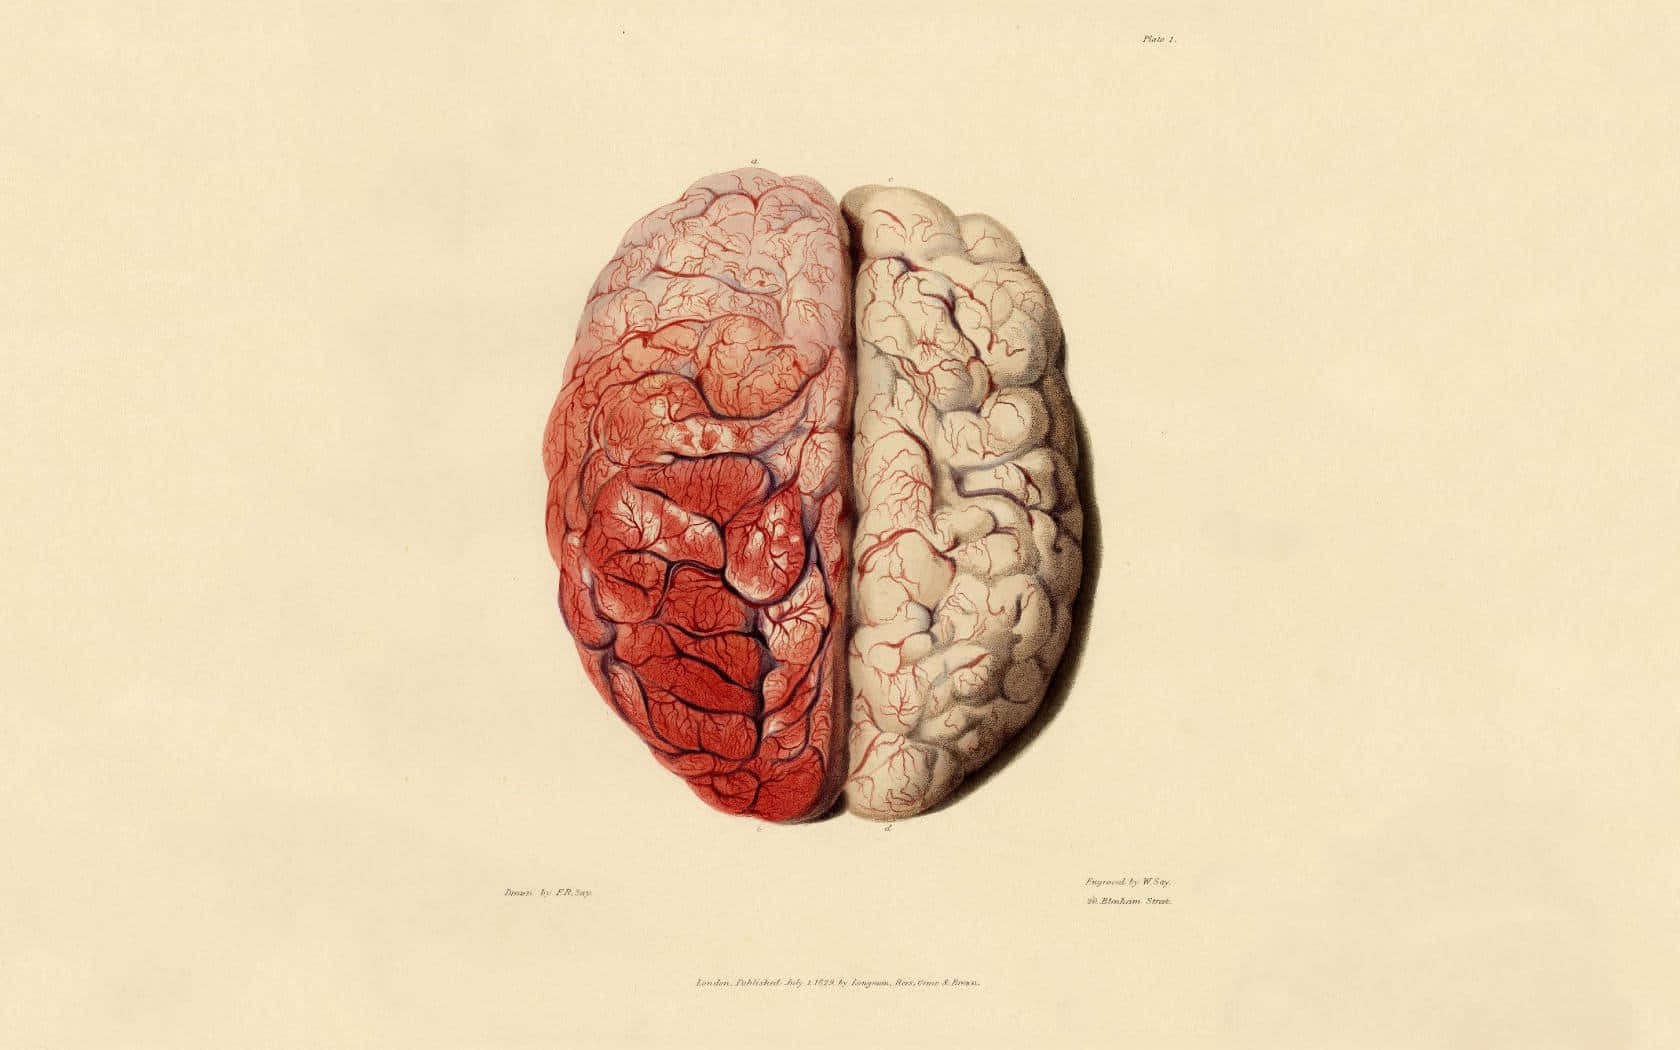 A Drawing Of A Human Brain With Red Blood Background